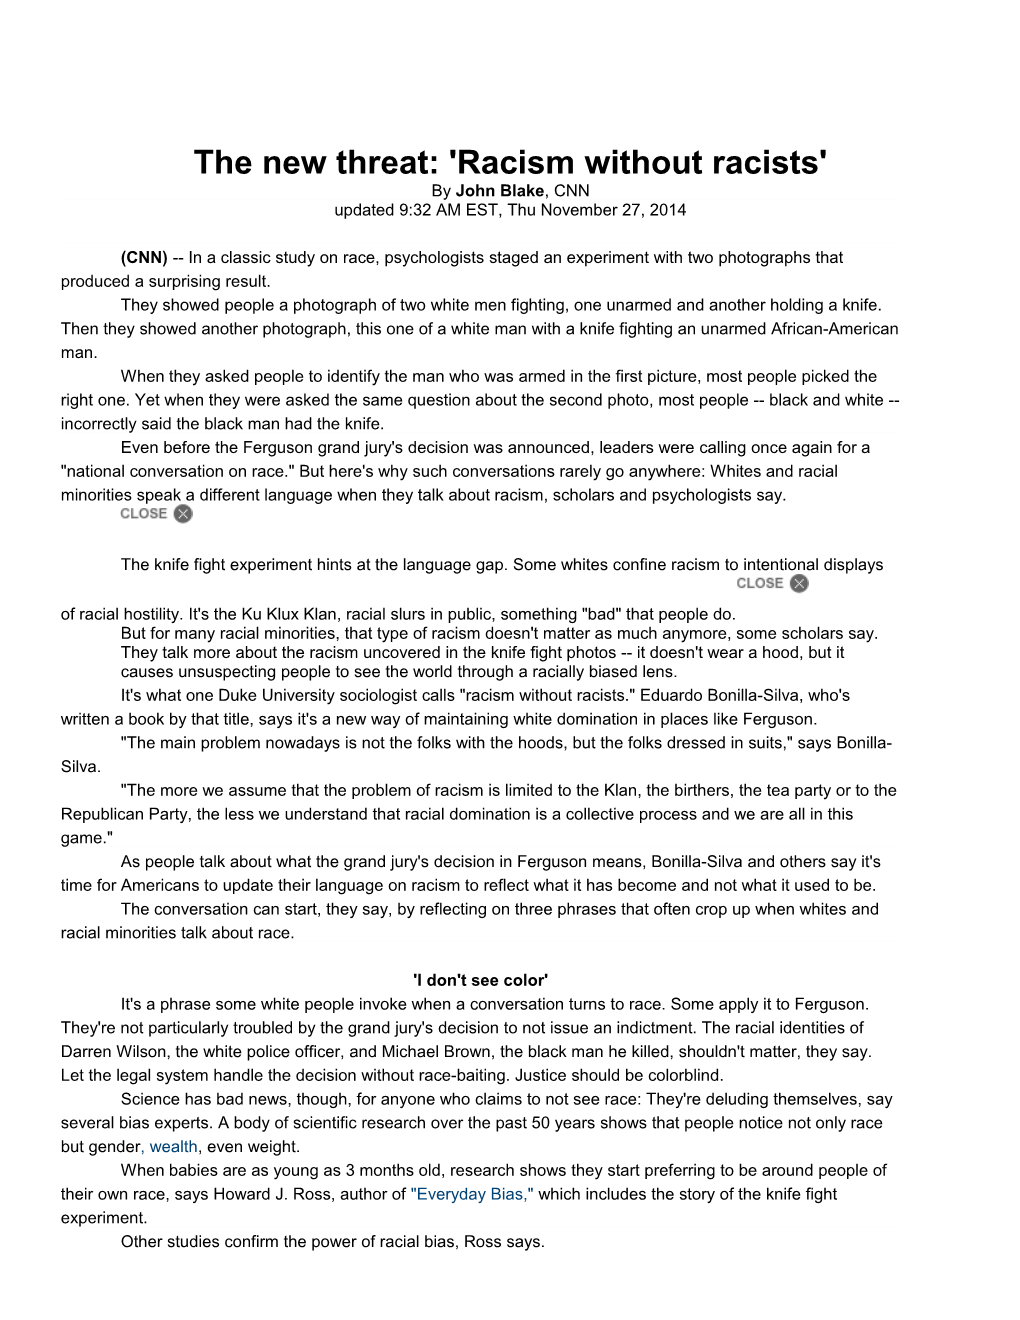 The New Threat: 'Racism Without Racists'